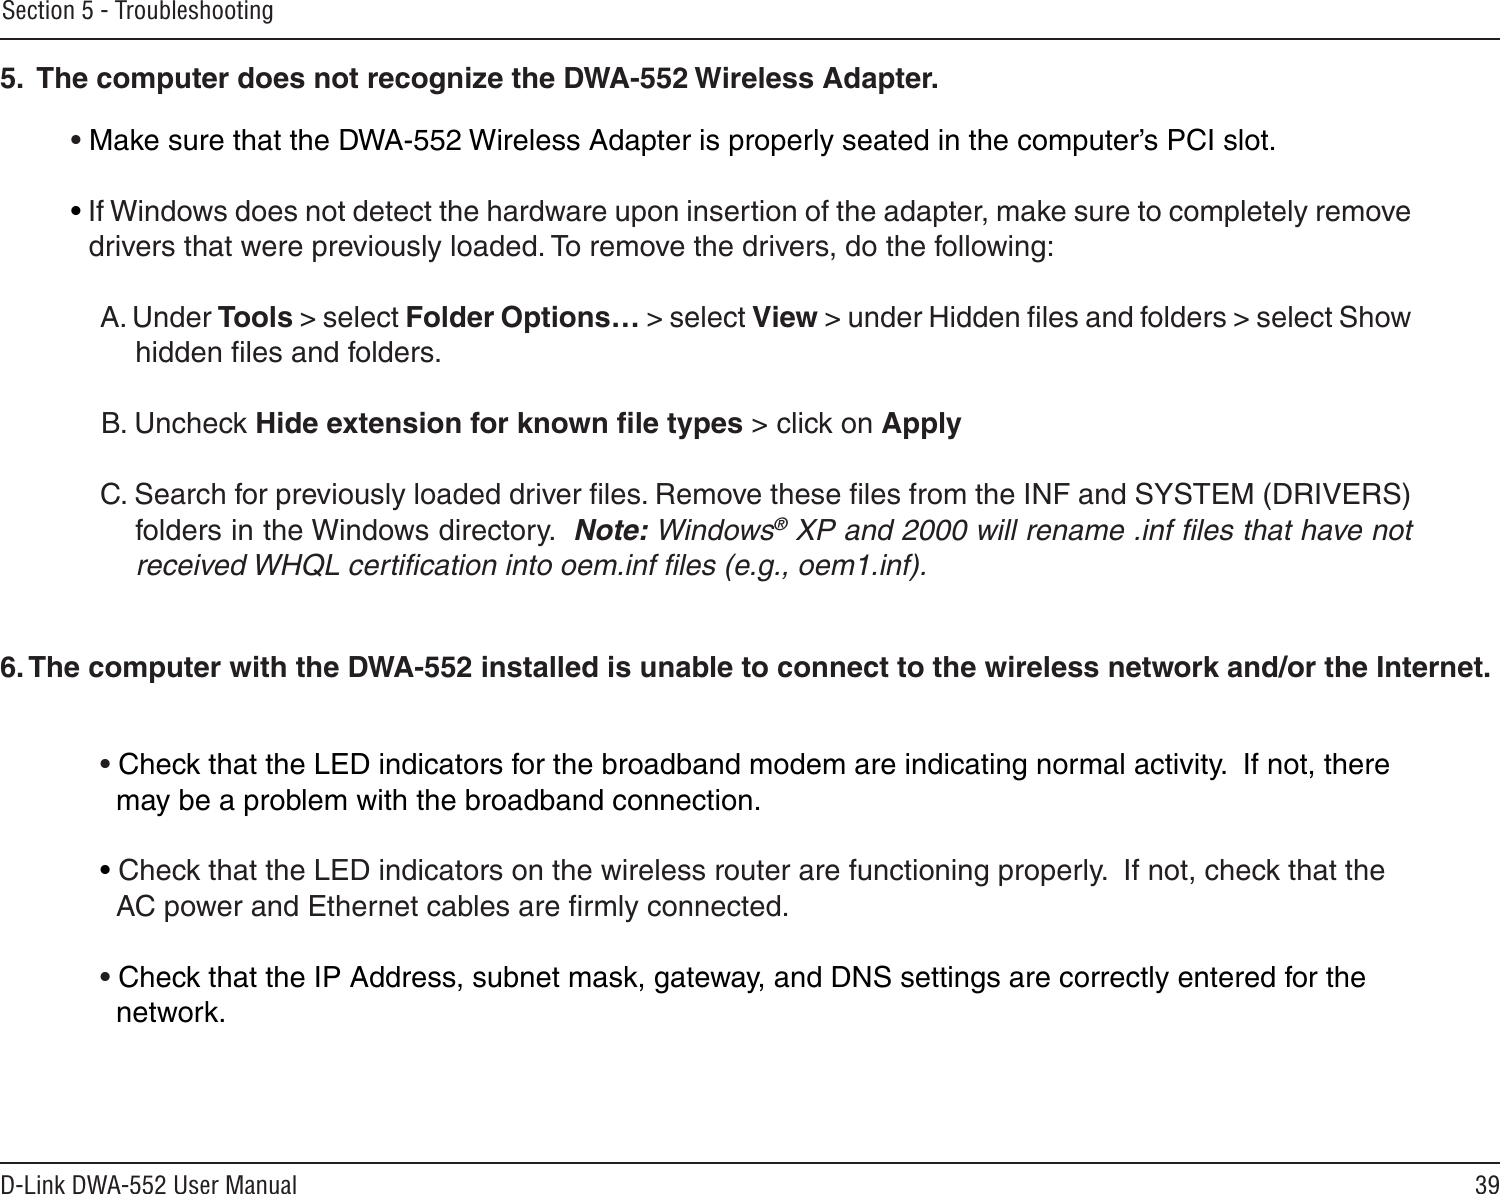 39D-Link DWA-552 User ManualSection 5 - Troubleshooting• Make sure that the DWA-552 Wireless Adapter is properly seated in the computer’s PCI slot.• If Windows does not detect the hardware upon insertion of the adapter, make sure to completely remove drivers that were previously loaded. To remove the drivers, do the following:A. Under Tools &gt; select Folder Options… &gt; select View &gt; under Hidden ﬁles and folders &gt; select Show  hidden ﬁles and folders.B. Uncheck Hide extension for known ﬁle types &gt; click on ApplyC. Search for previously loaded driver ﬁles. Remove these ﬁles from the INF and SYSTEM (DRIVERS) folders in the Windows directory.  Note: Windows® XP and 2000 will rename .inf ﬁles that have not received WHQL certiﬁcation into oem.inf ﬁles (e.g., oem1.inf).5.  The computer does not recognize the DWA-552 Wireless Adapter.• Check that the LED indicators for the broadband modem are indicating normal activity.  If not, there   may be a problem with the broadband connection.• Check that the LED indicators on the wireless router are functioning properly.  If not, check that the   AC power and Ethernet cables are ﬁrmly connected.• Check that the IP Address, subnet mask, gateway, and DNS settings are correctly entered for the   network.6. The computer with the DWA-552 installed is unable to connect to the wireless network and/or the Internet.